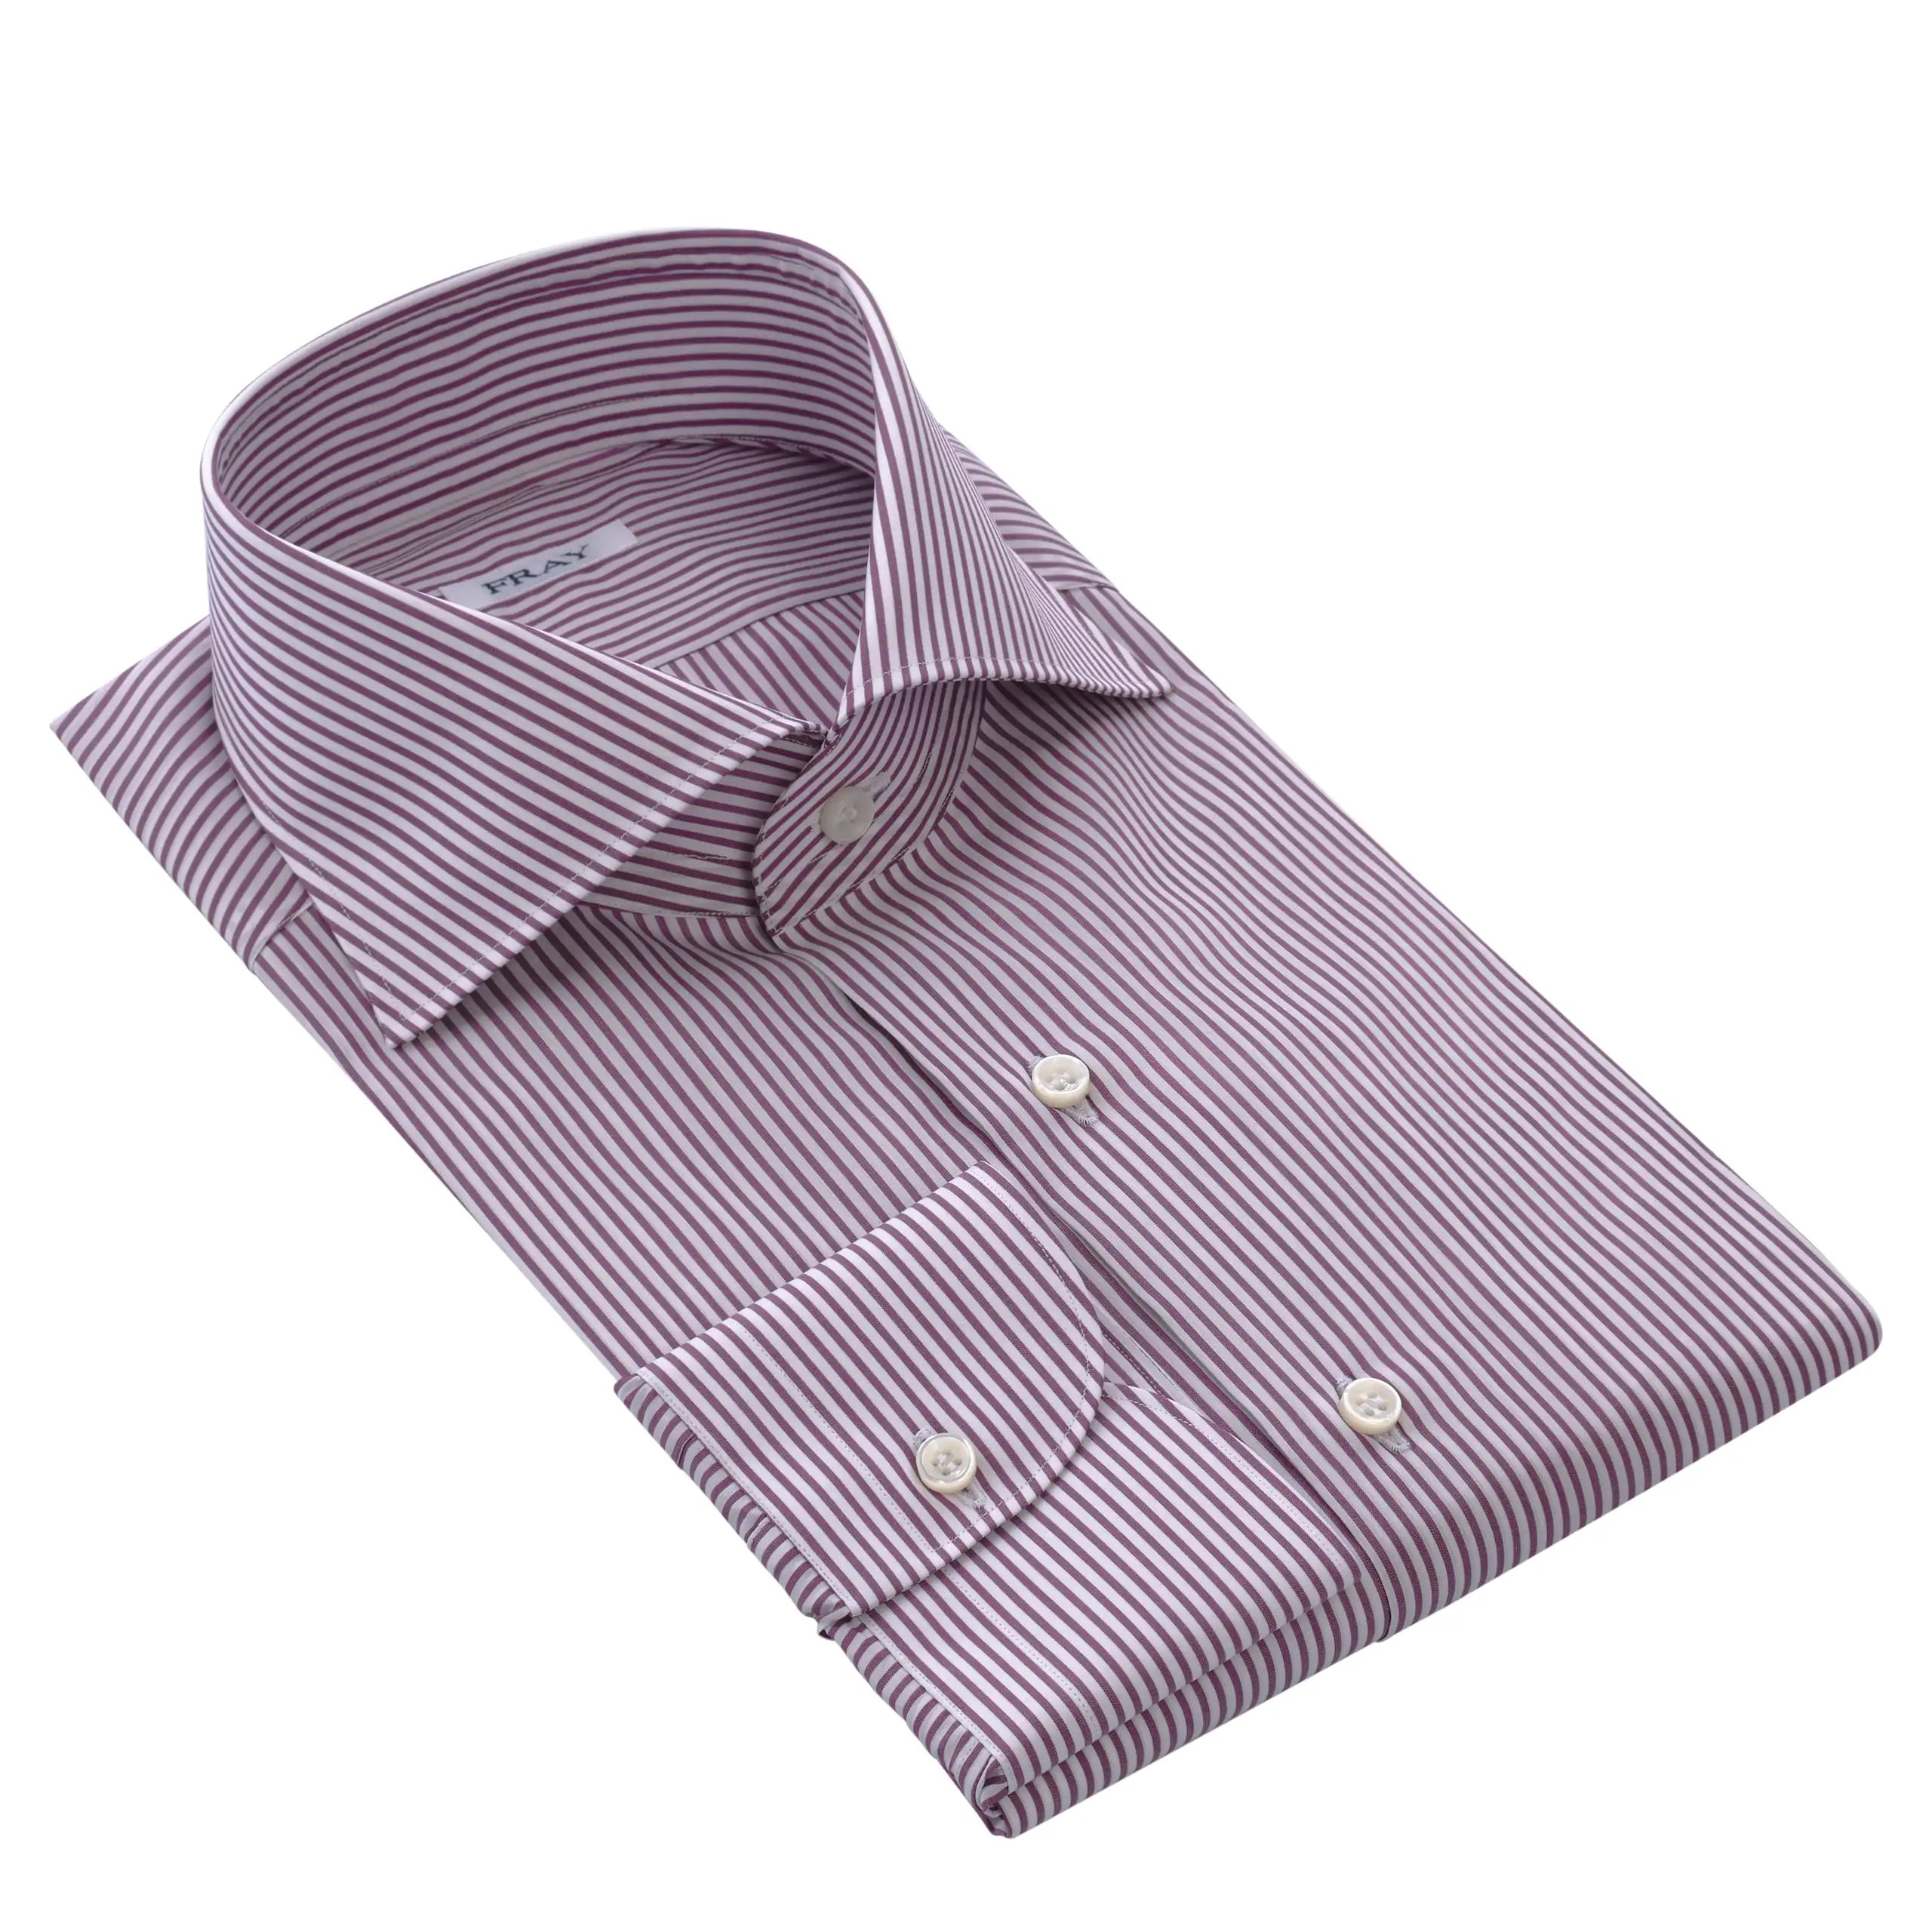 Fine Striped Shirt in Violet and White